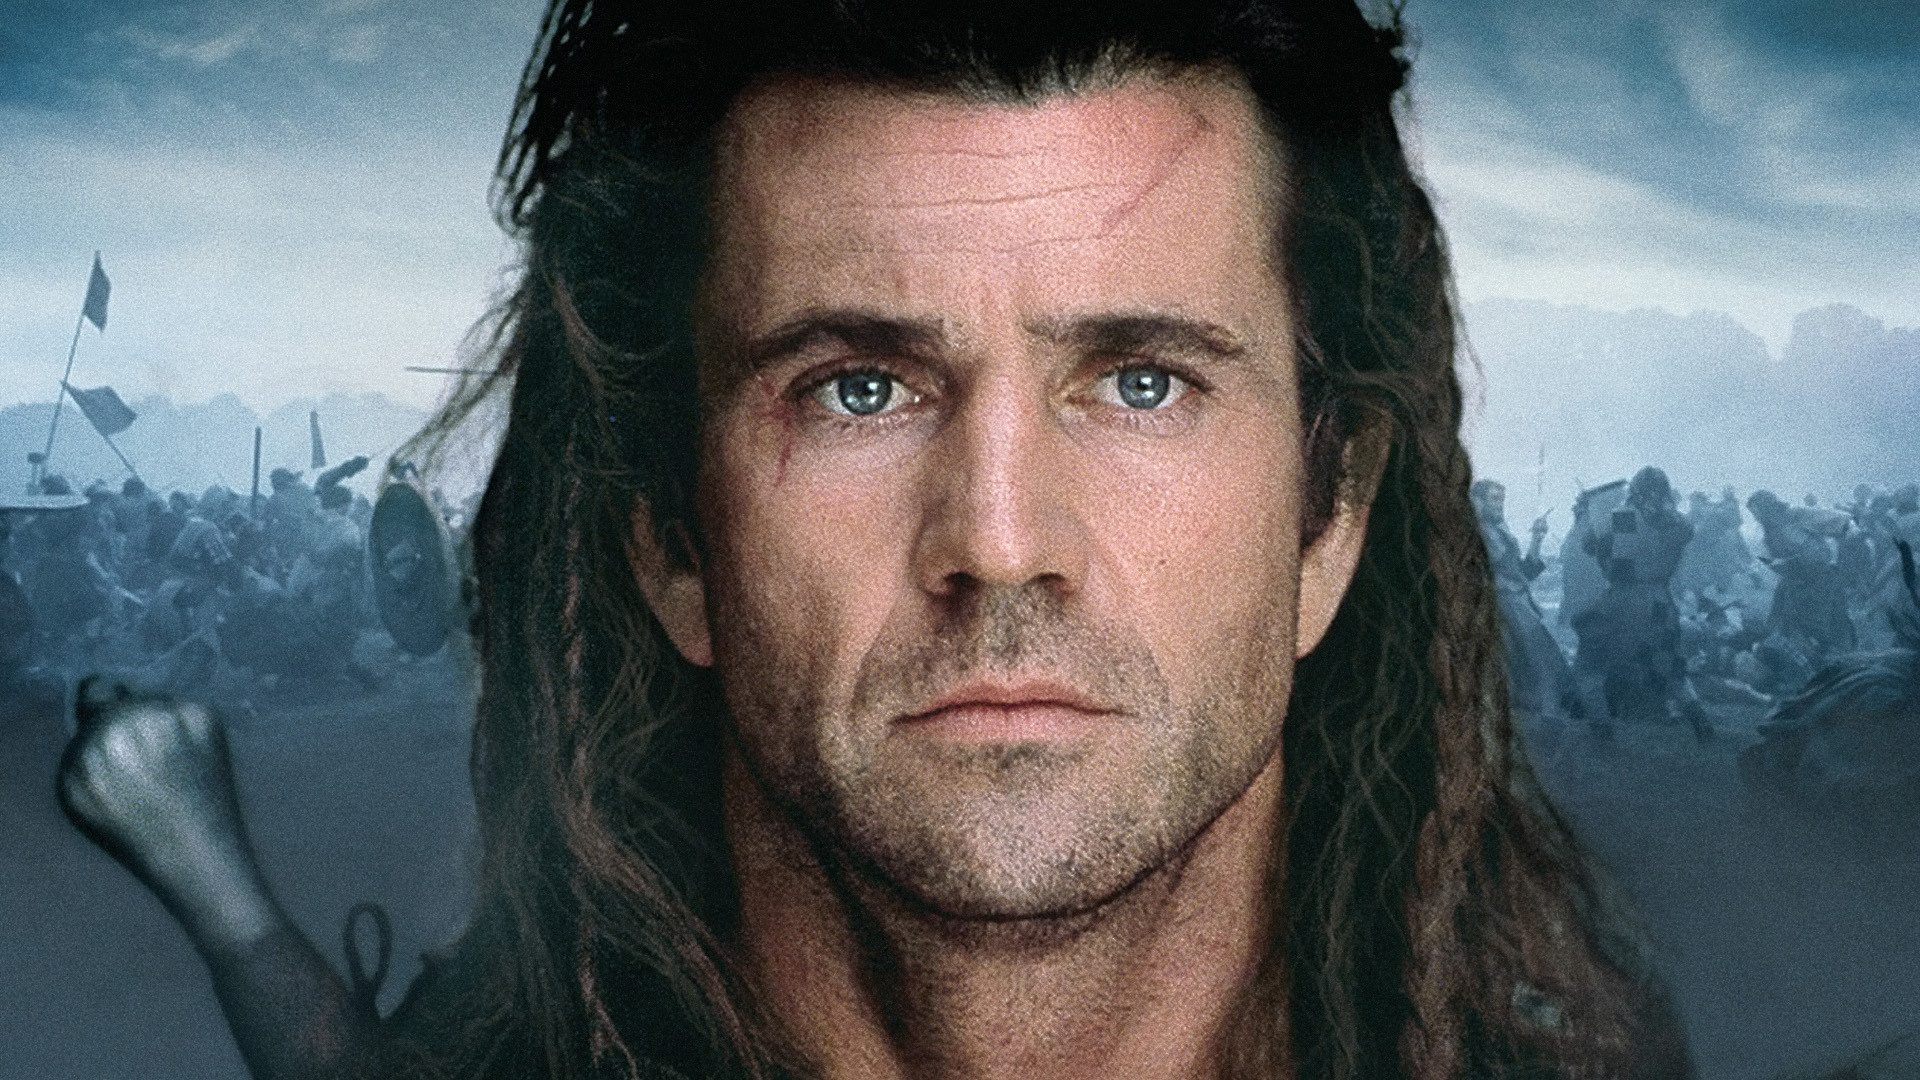 Braveheart quotes, Mel Gibson's words, Iconic speech, Inspirational lines, 1920x1080 Full HD Desktop